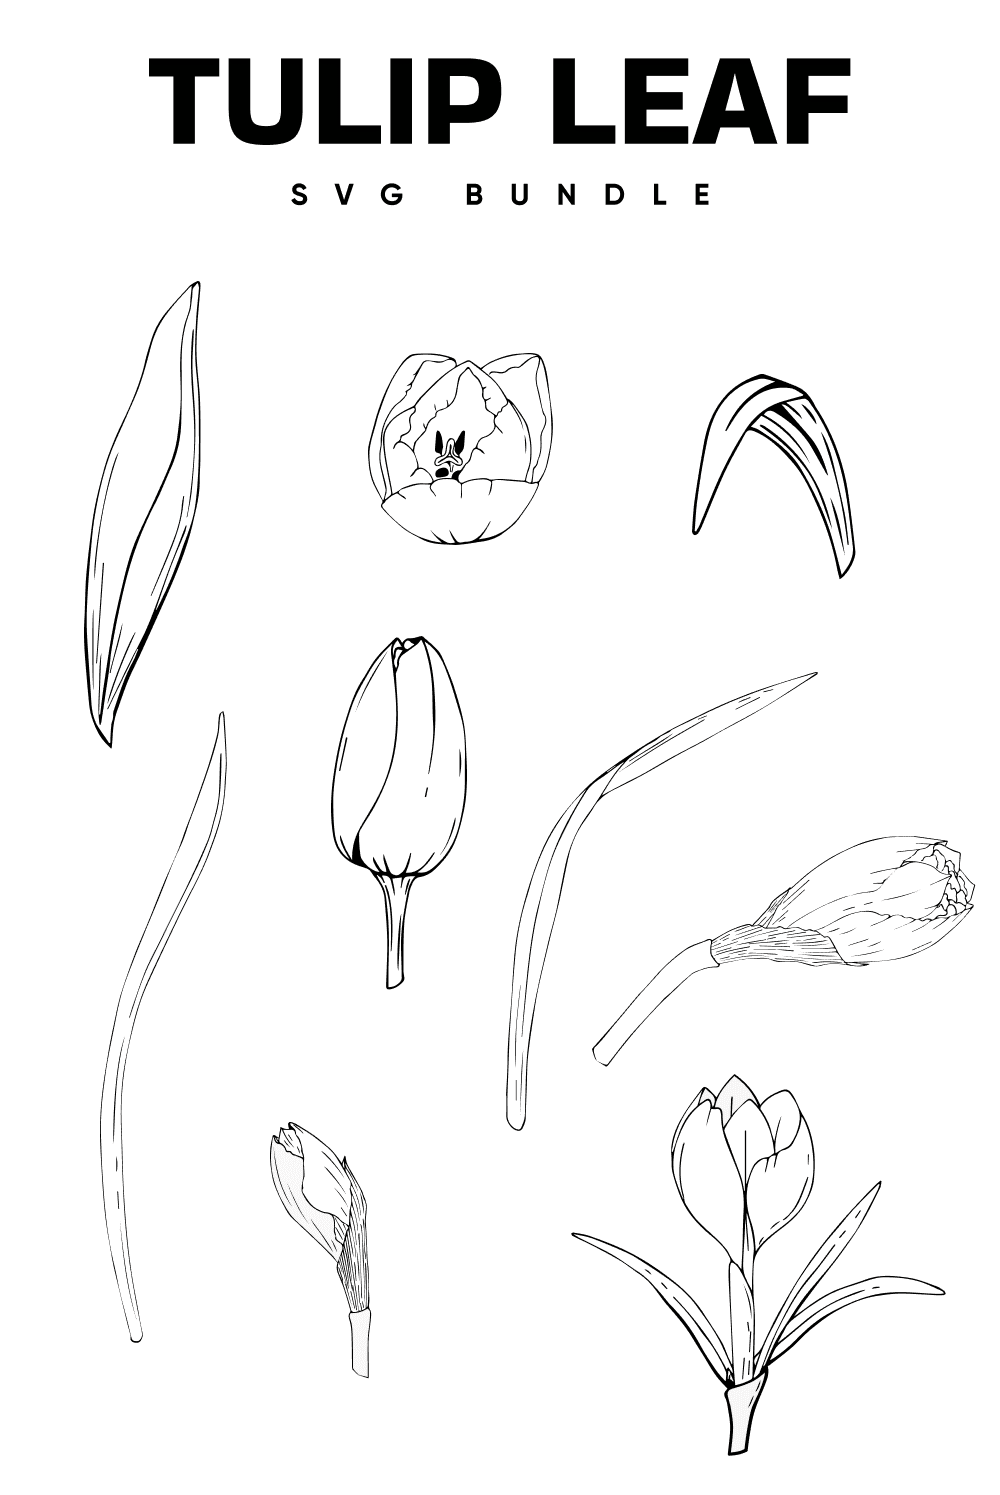 The part of the tulips is drawn in detail with a black outline.